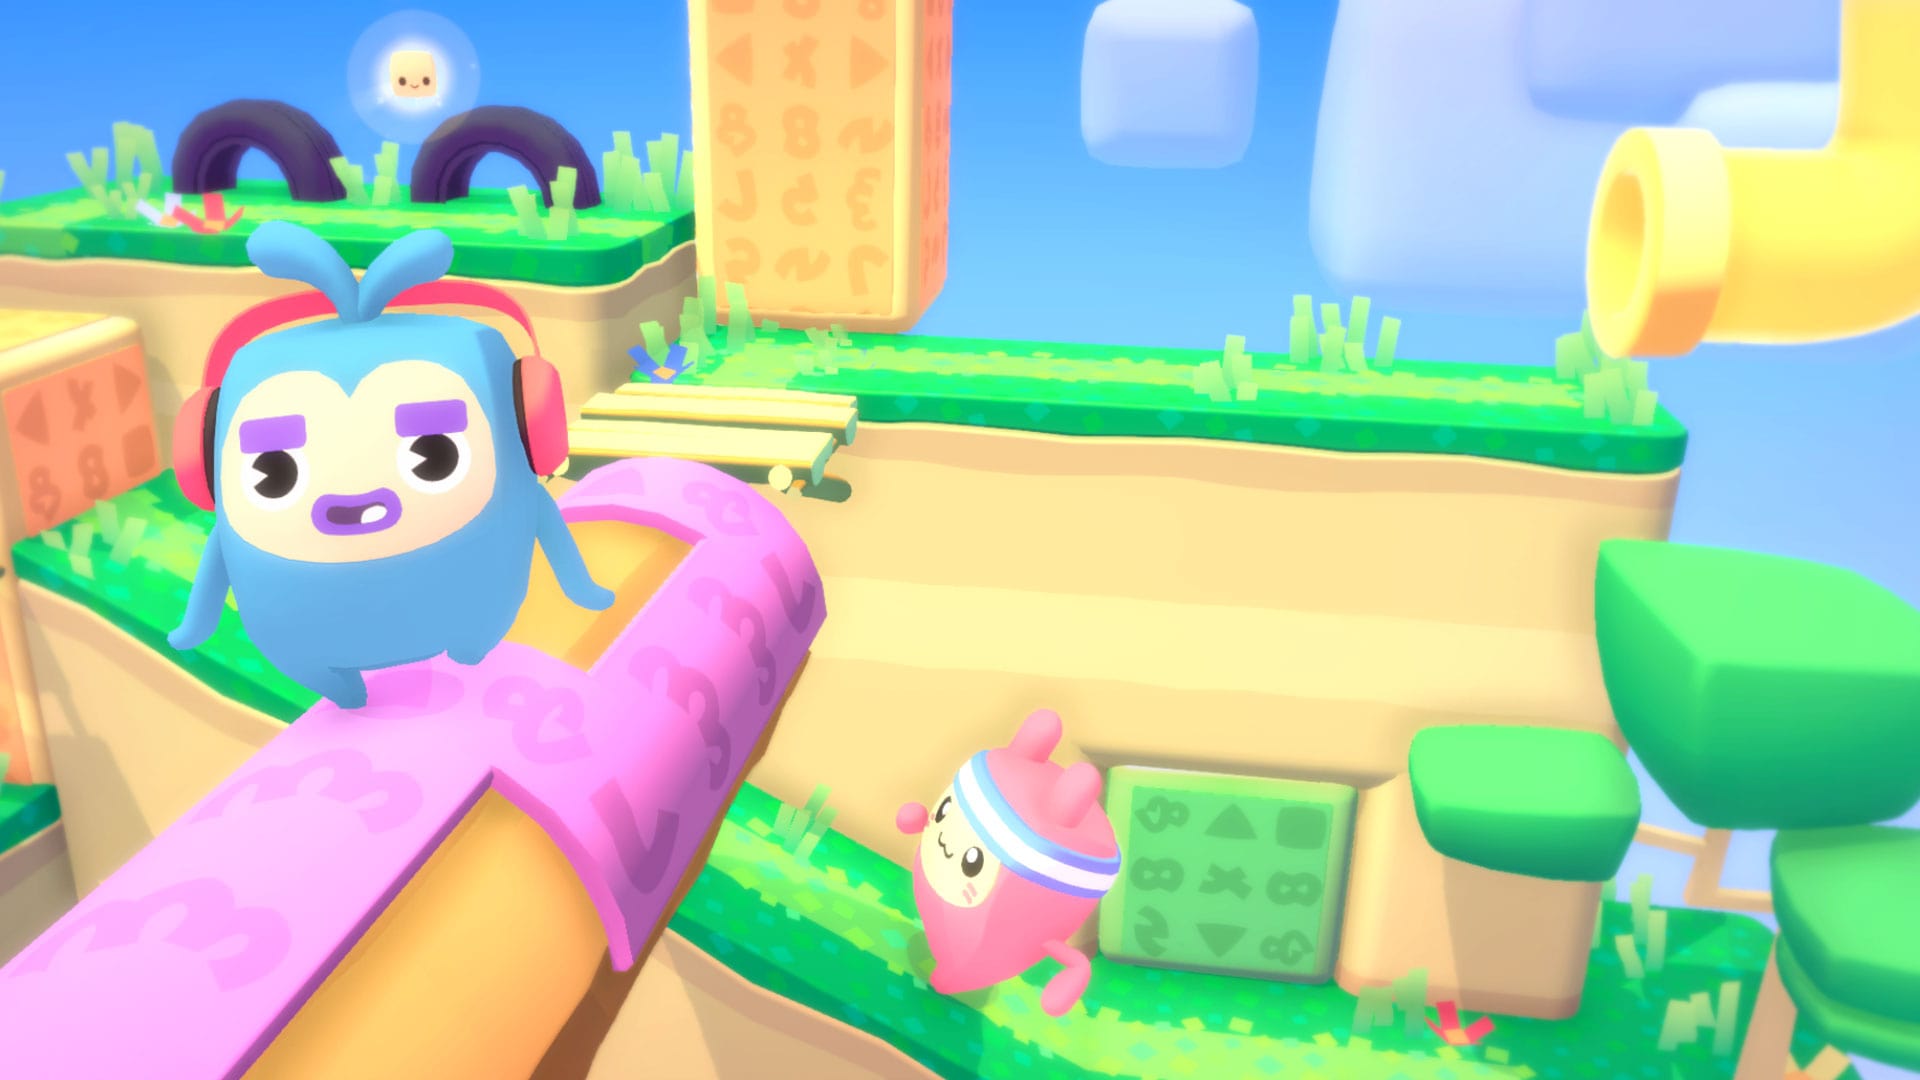 Melbits World Review: Fun for kids, amusing for adults